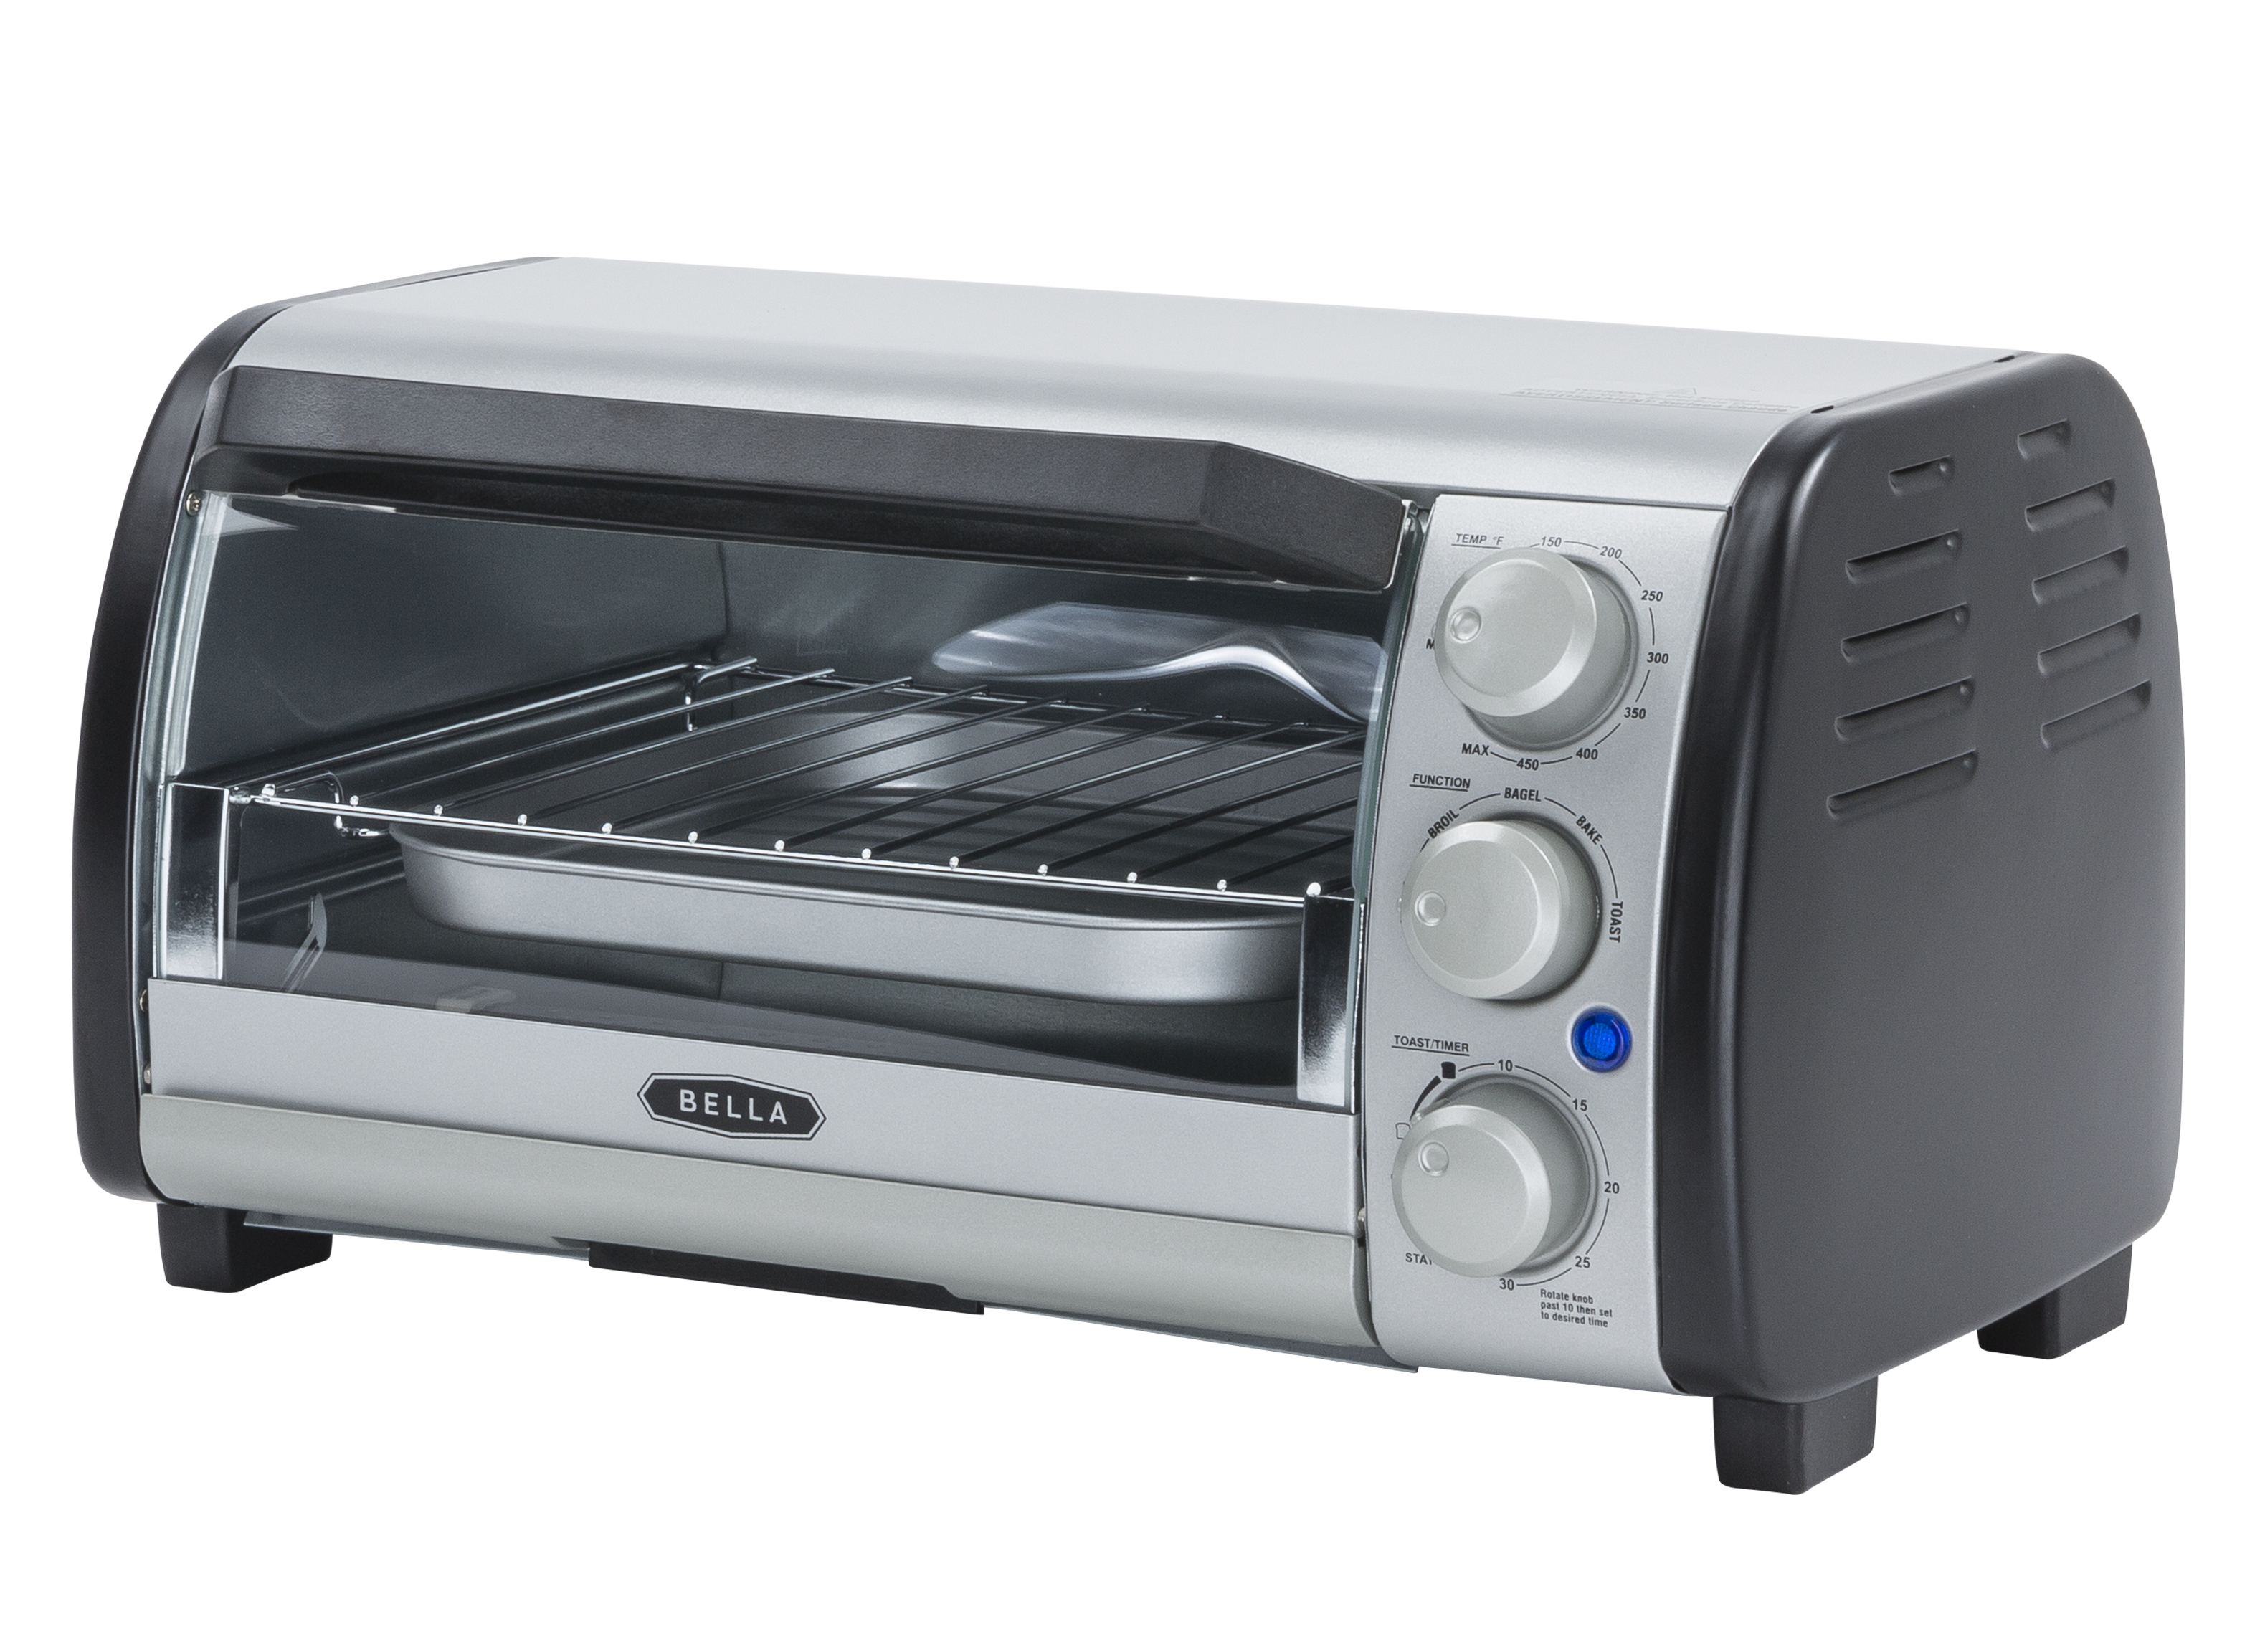 https://crdms.images.consumerreports.org/prod/products/cr/models/389602-toasterovens-bella-4slice14326.png